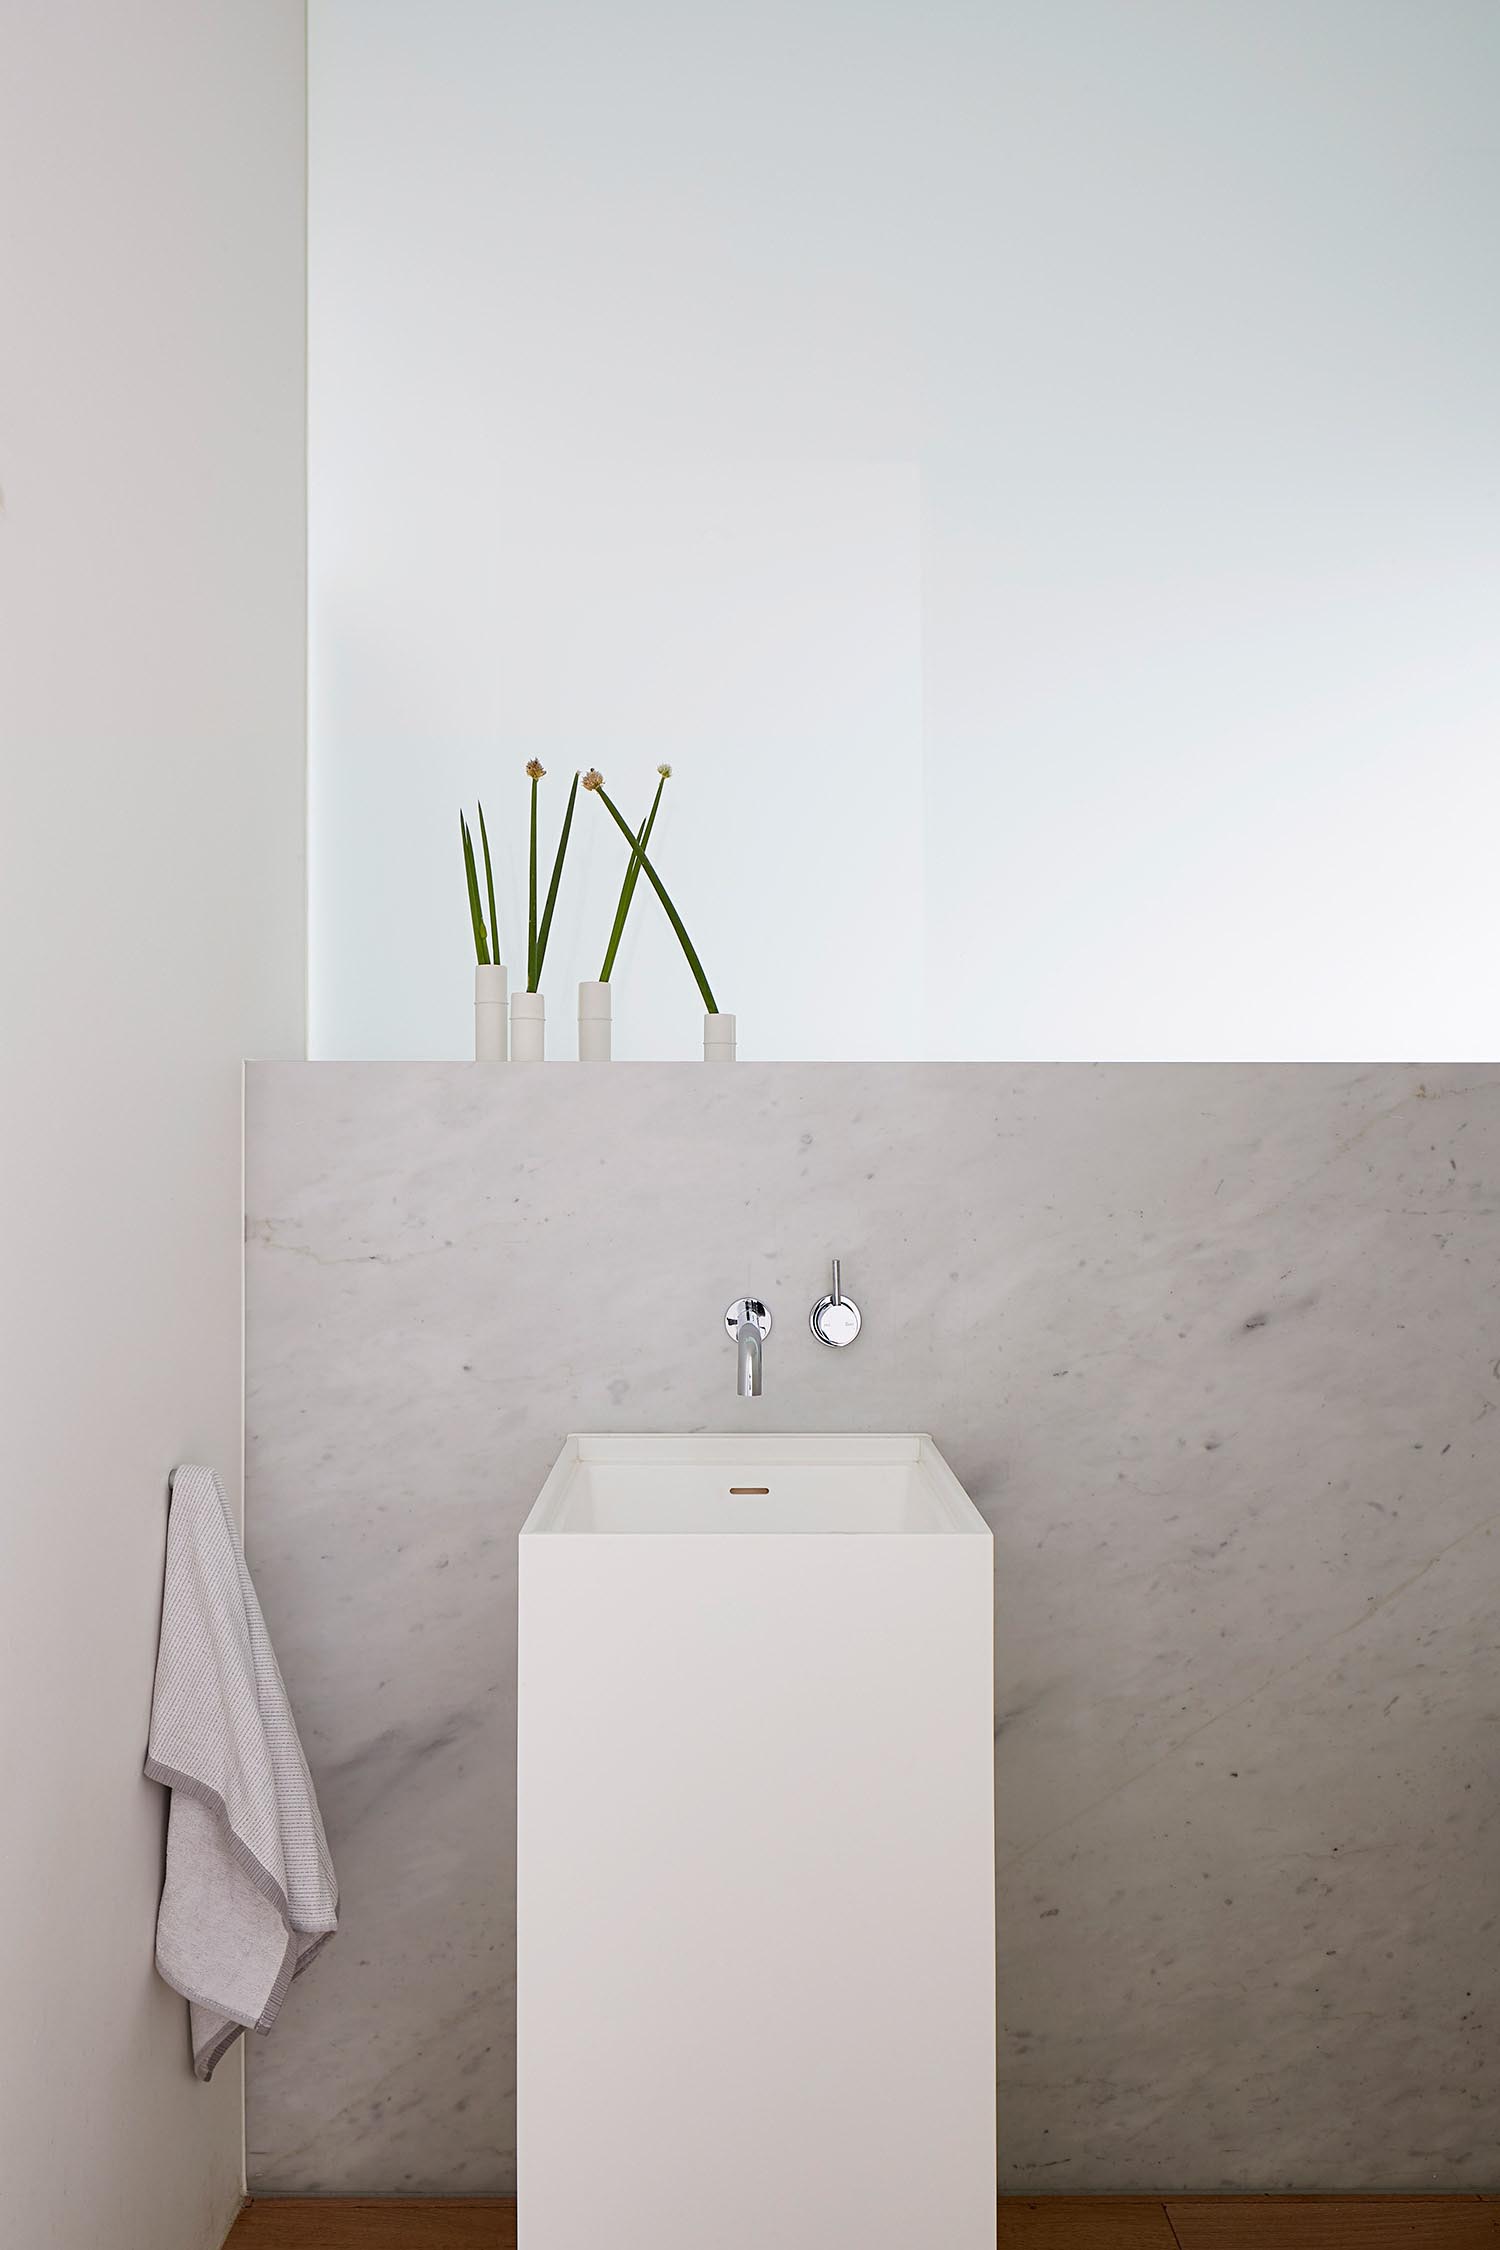 A modern bathroom with a neutral color palette and a modern white pedestal sink.